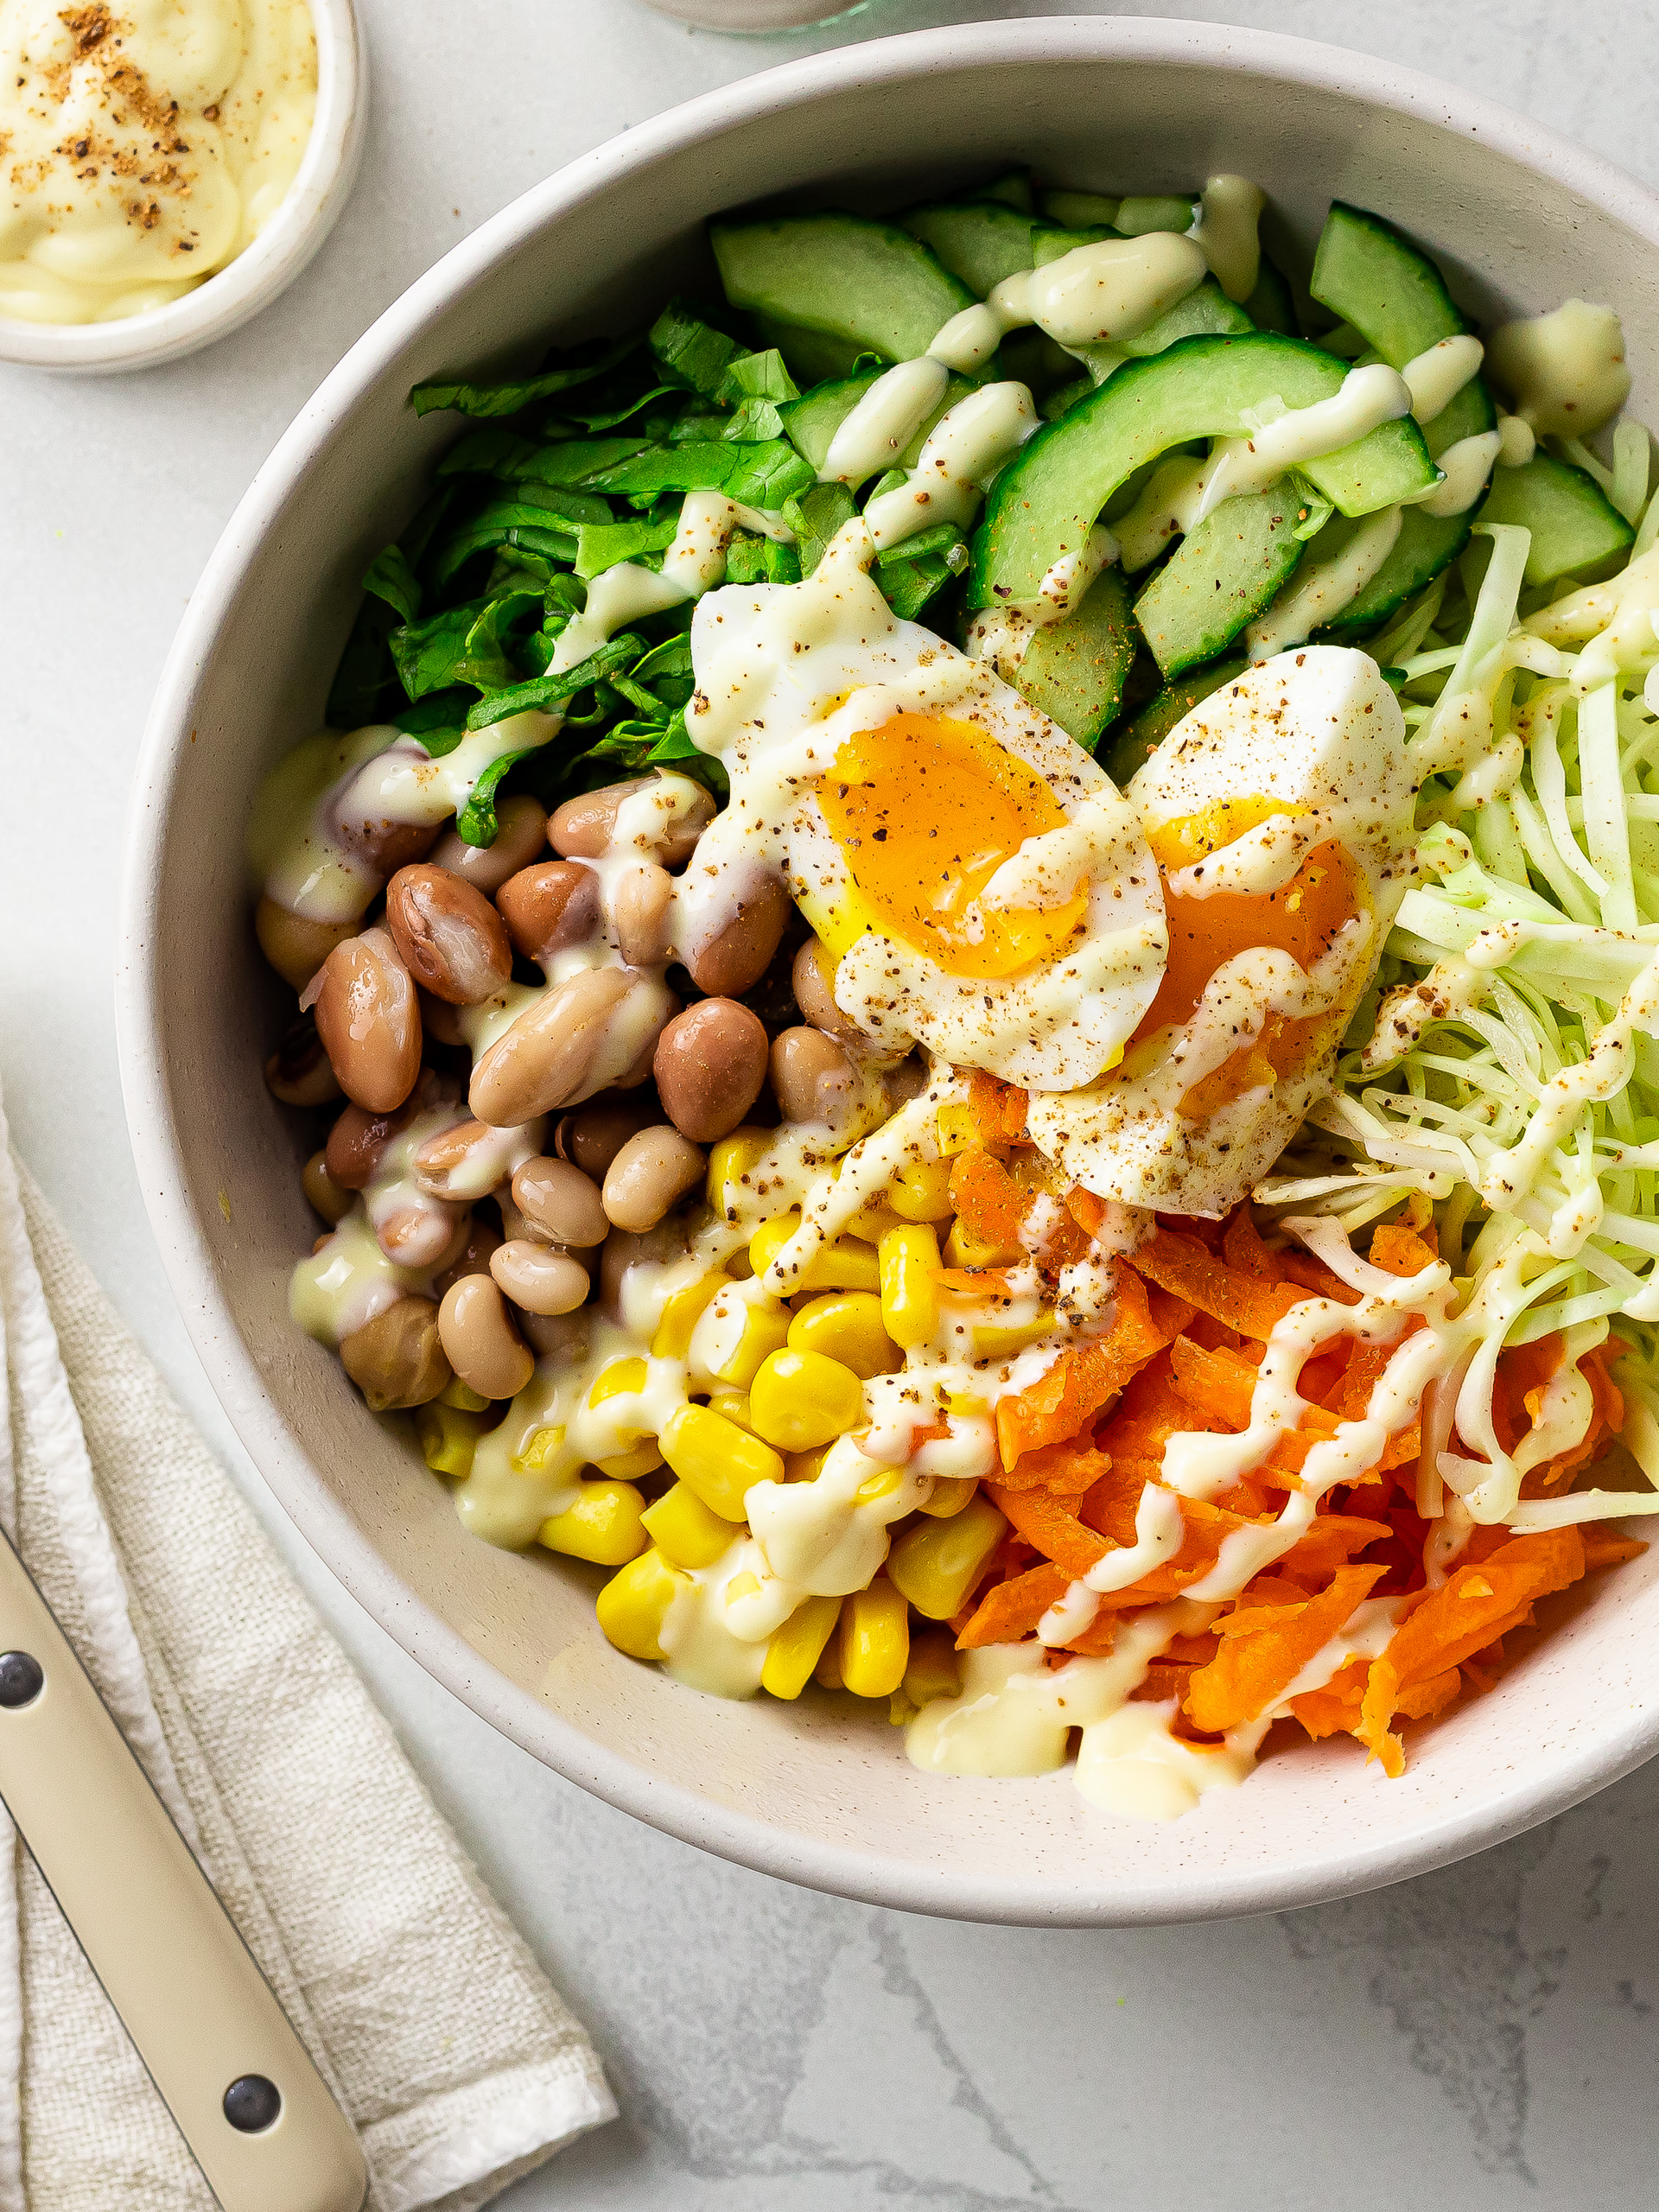 nigerian vegetable salad with eggs beans and cream dressing